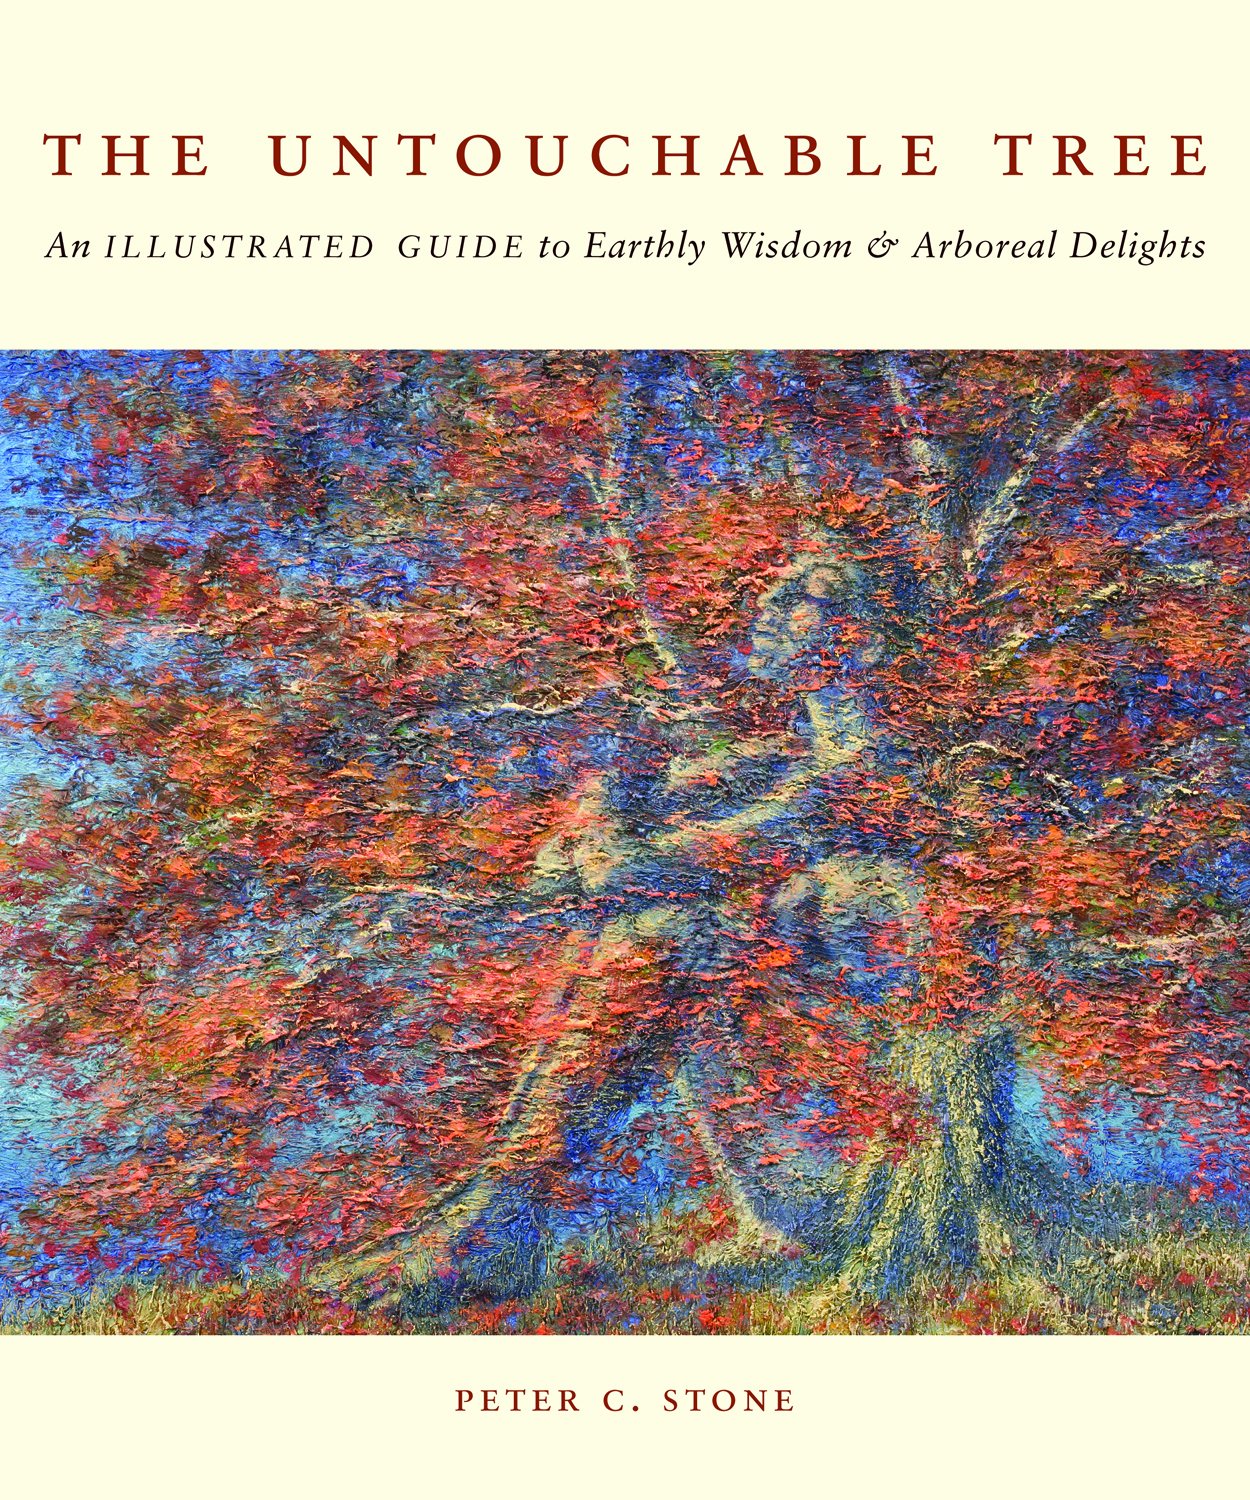 The Untouchable Tree, An Illustrated Guide to Earthly Wisdom & Arboreal Delights